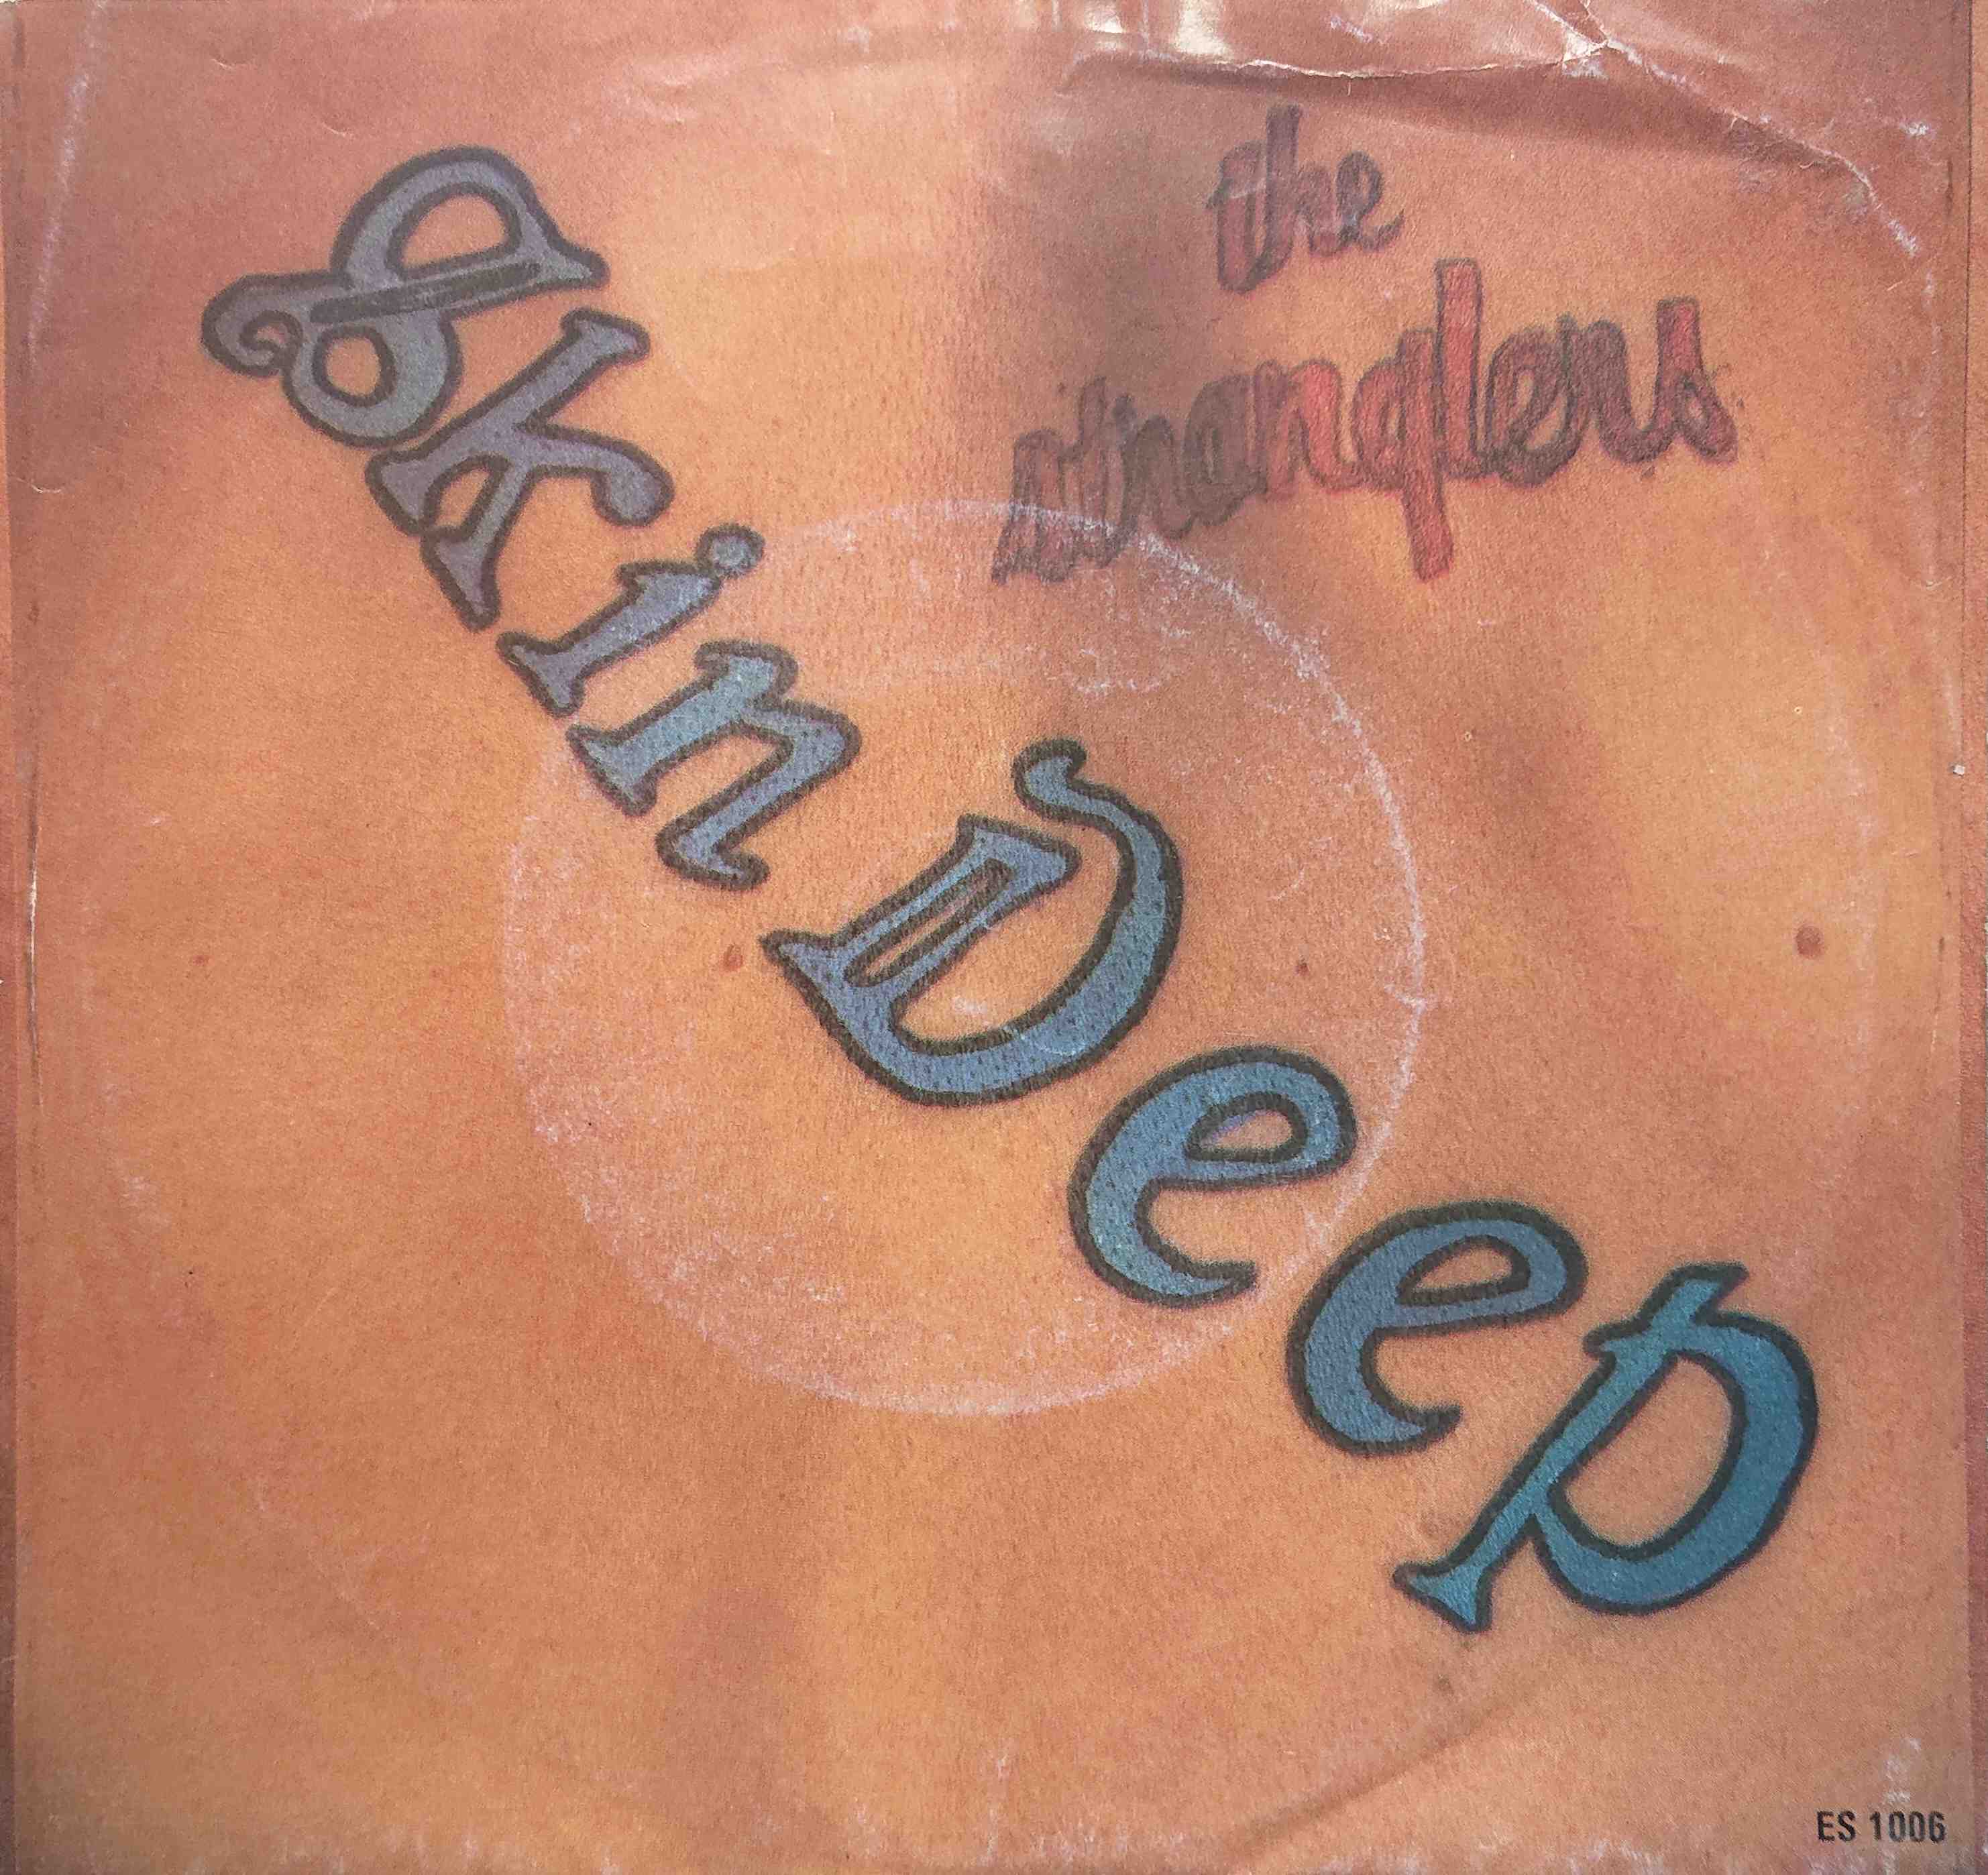 Picture of Skin deep by artist The Stranglers from The Stranglers singles